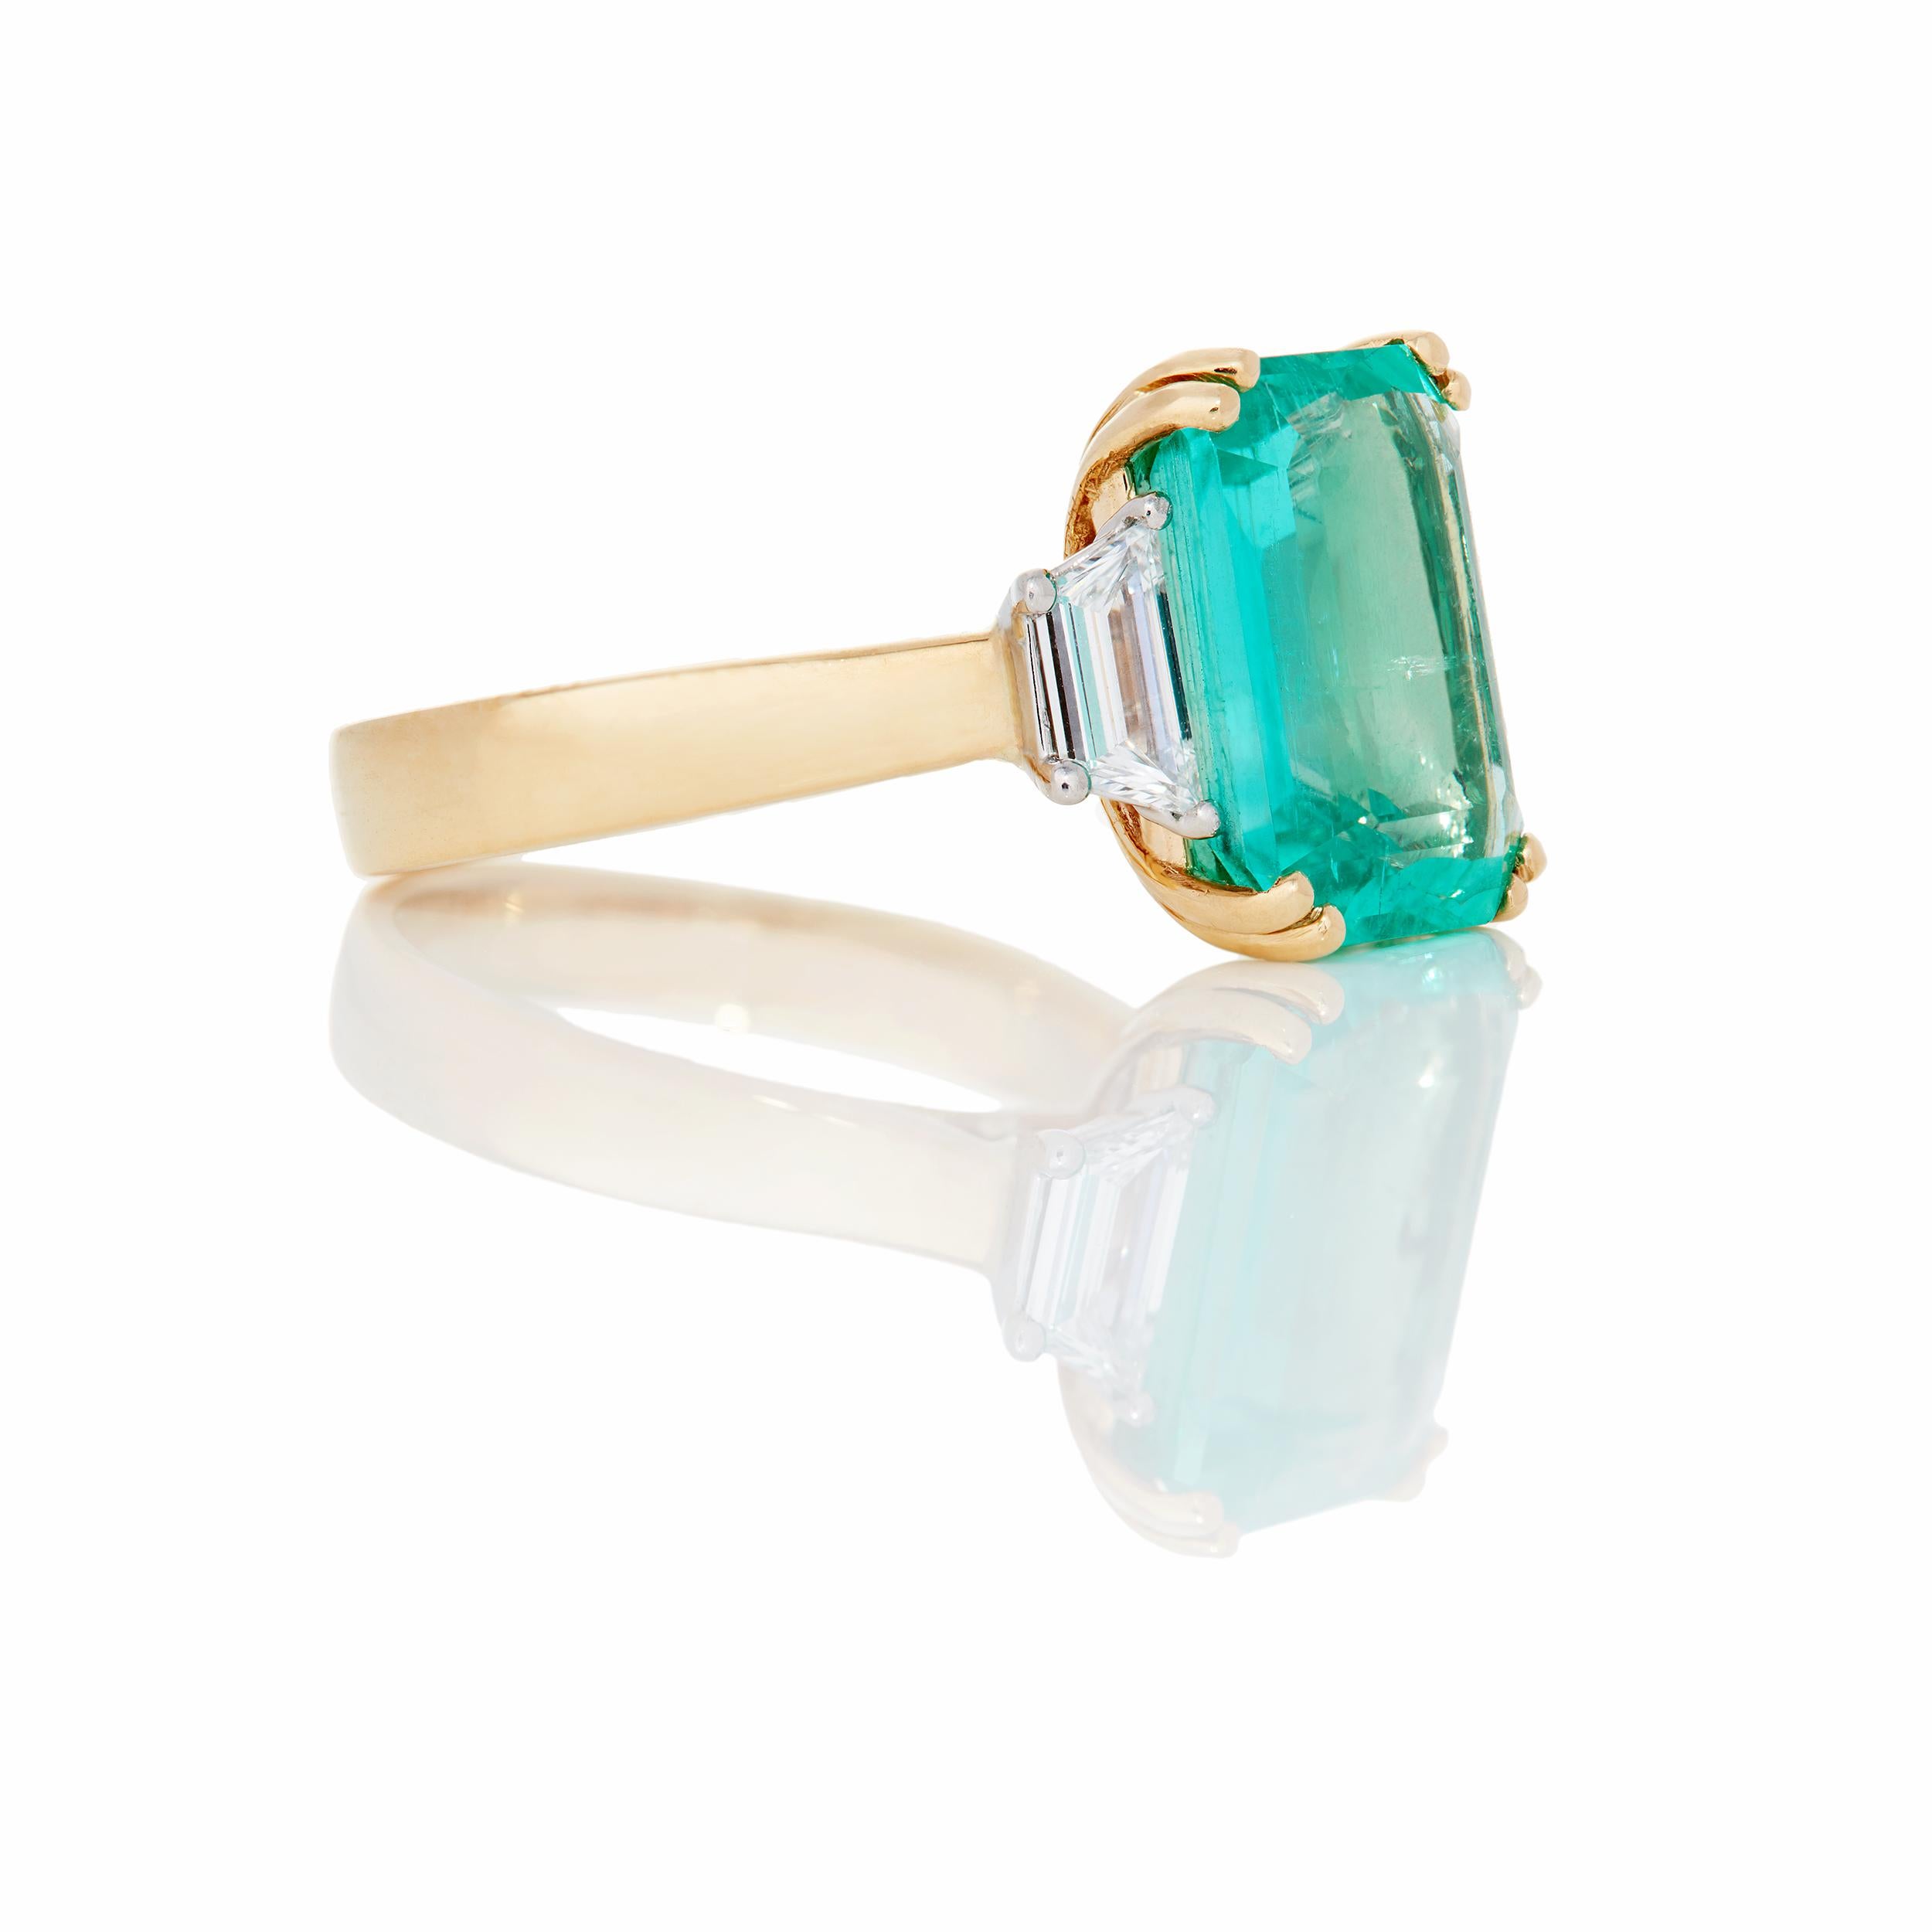 A stunning and ever classic Colombian Emerald ring flanked by two matched Trapezoid Diamonds.  Notice the subtle detail in the profile through use of sweeping lines for an elegant one-of-a-kind ring.  The ring is constructed in 18 Karat Yellow Gold